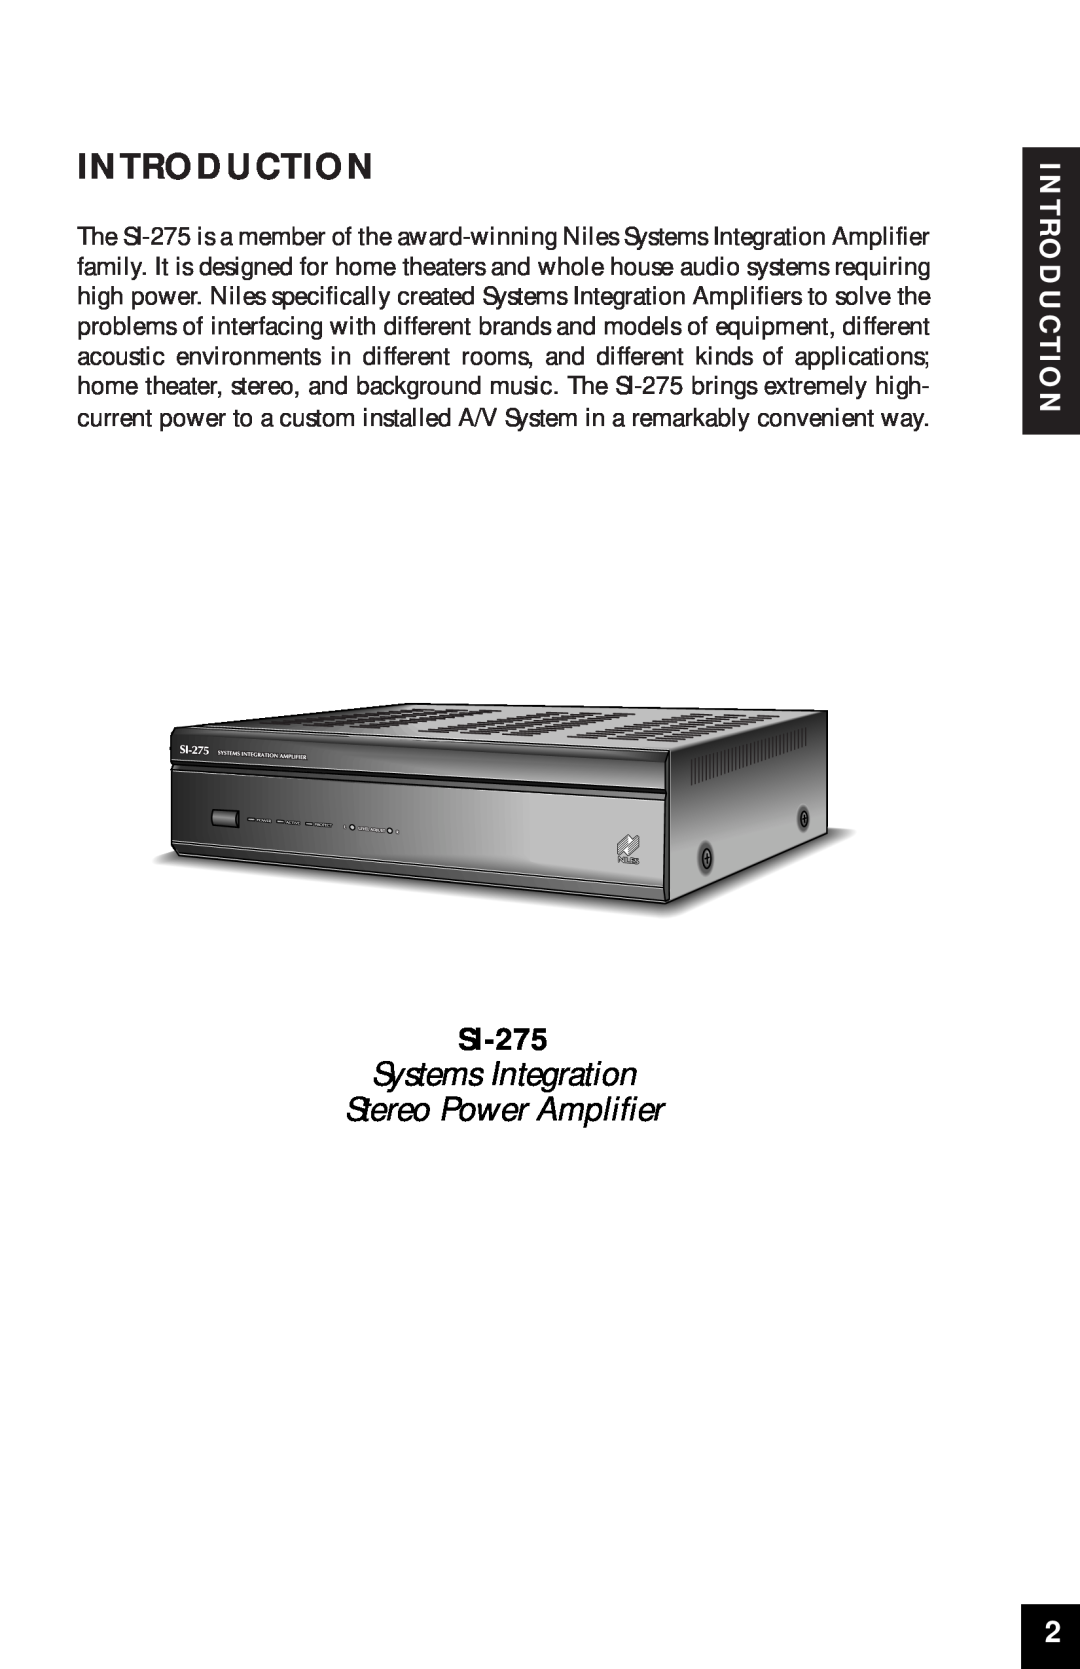 Niles Audio SI-275 manual Introduction, Systems Integration Stereo Power Amplifier 